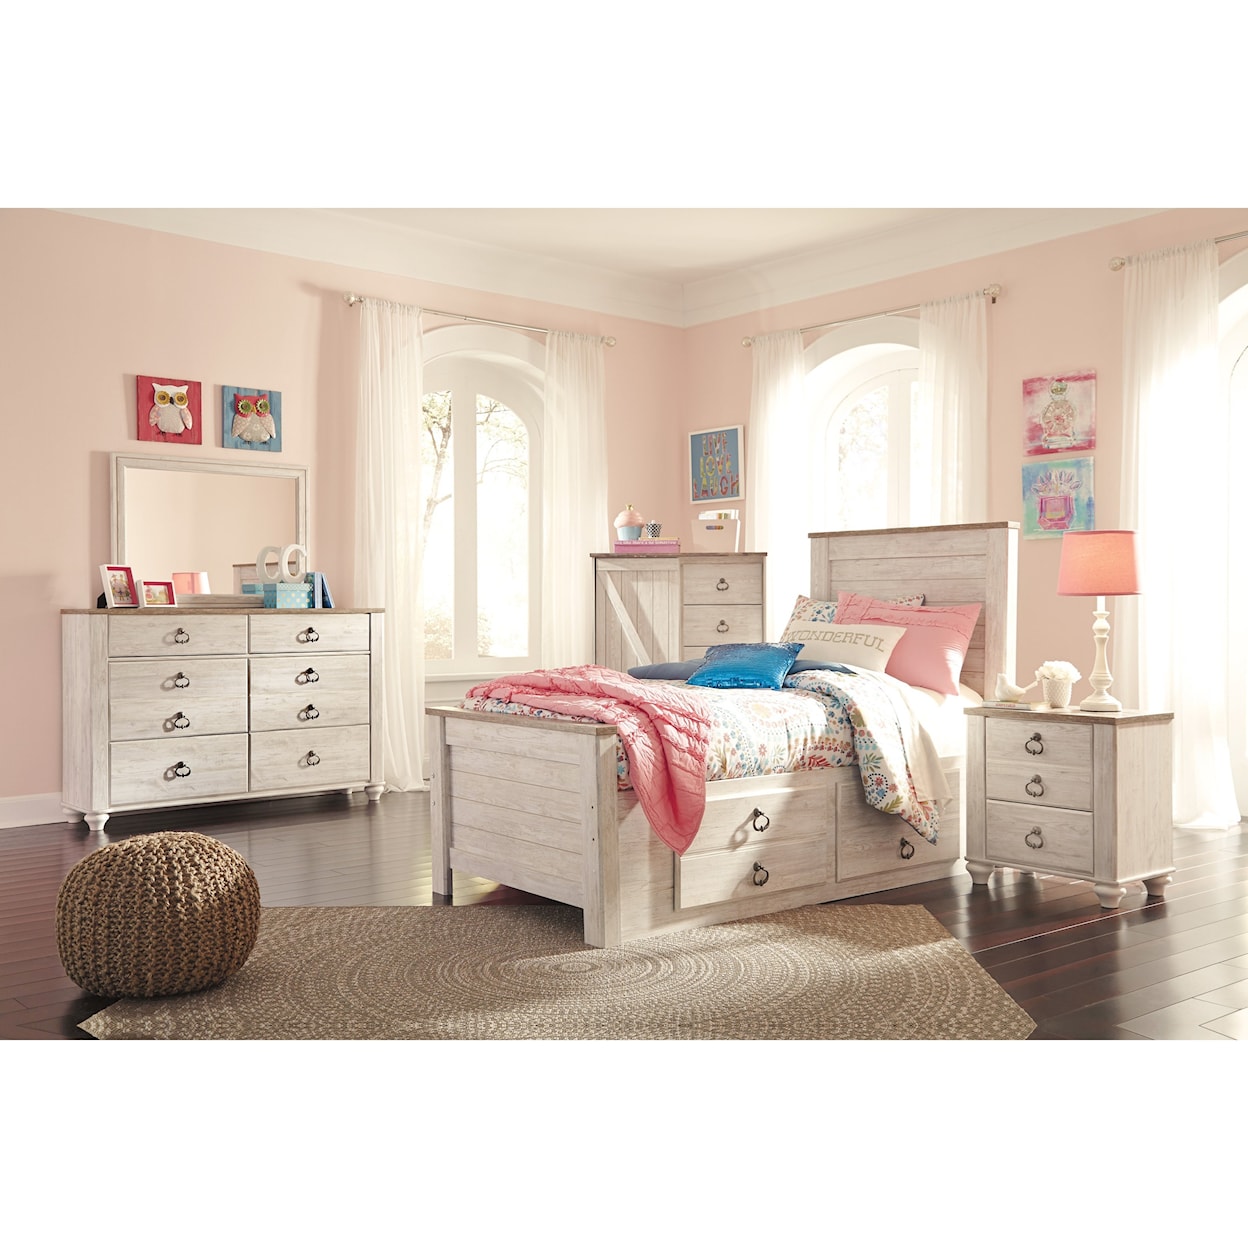 Ashley Furniture Signature Design Willowton Twin Bed with Underbed Storage Drawers